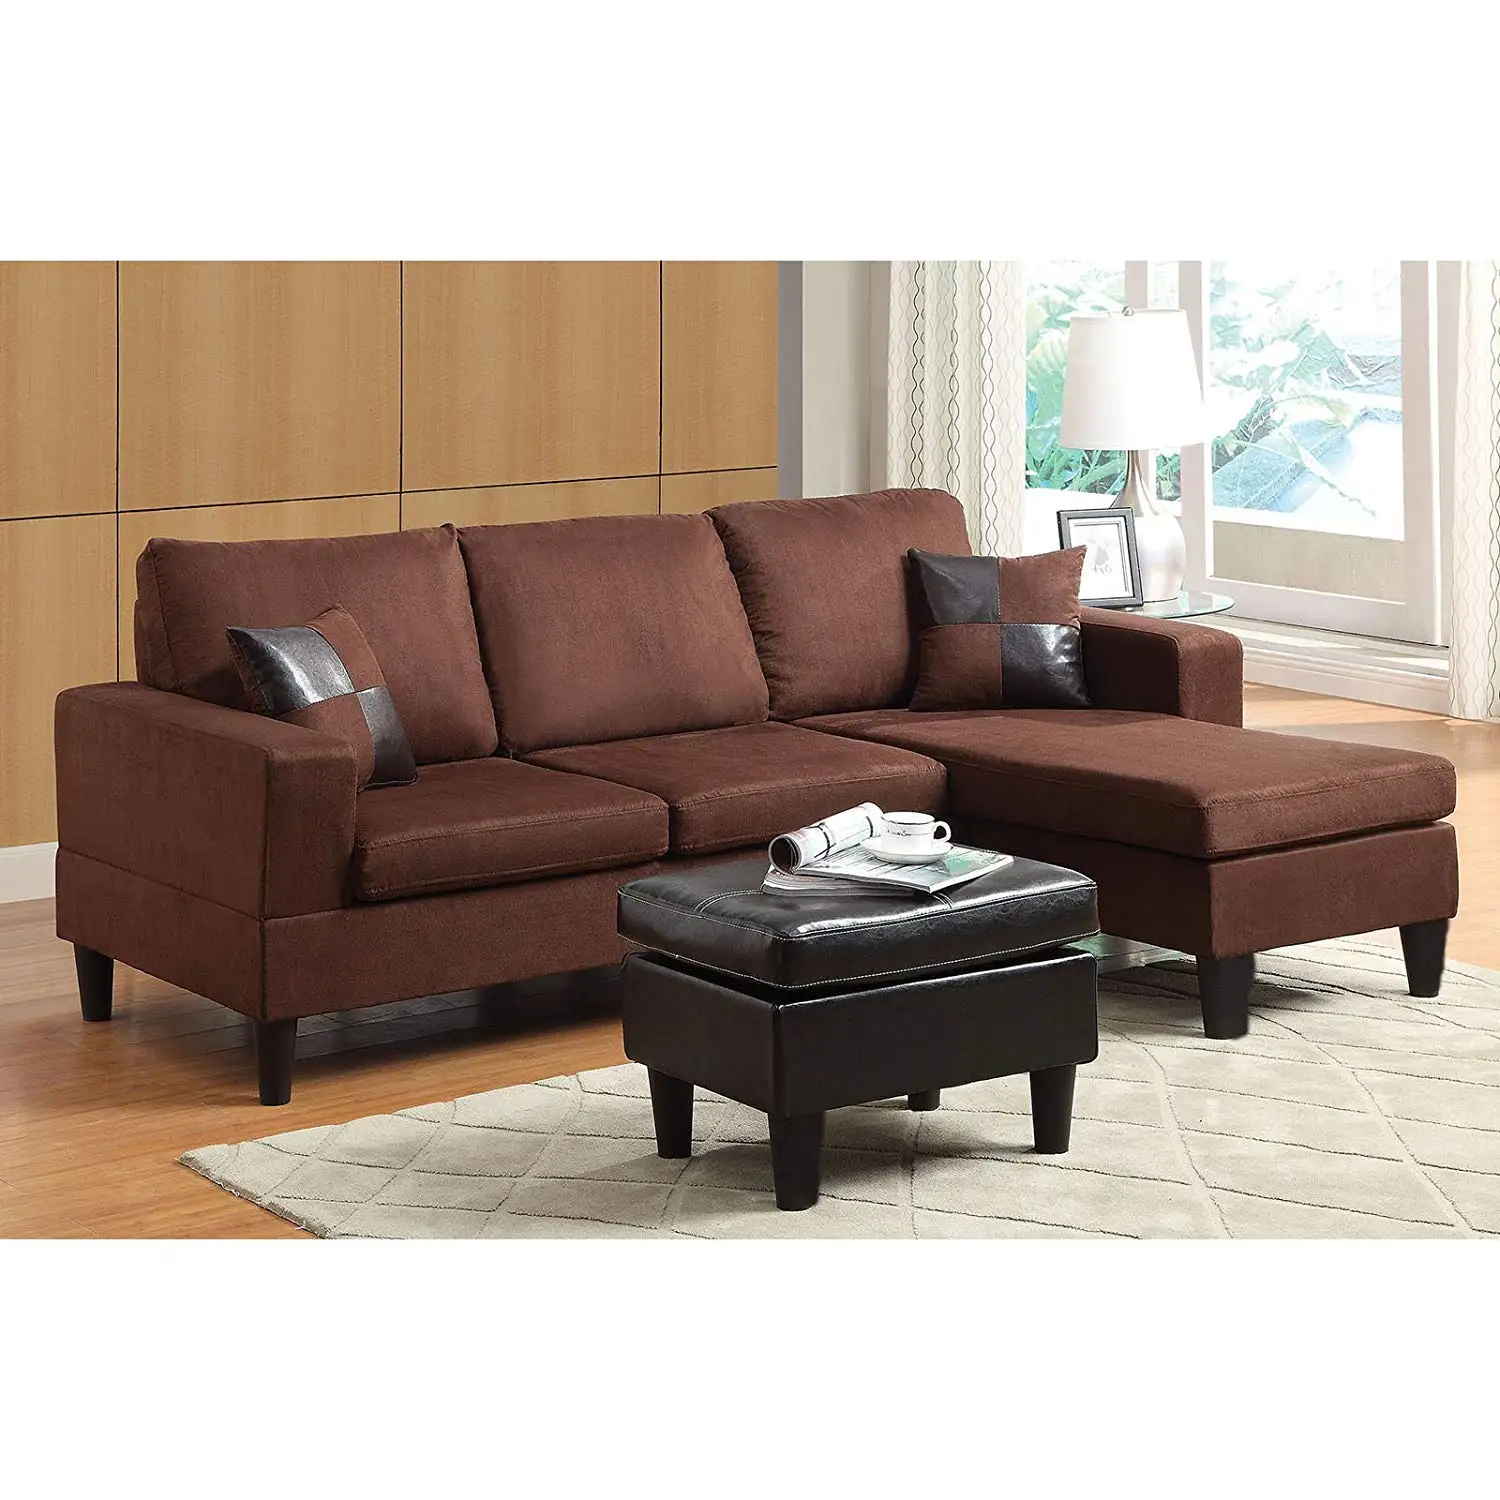 Buy Sofa Legs, GLTECK Tapered Plastic Sofa Couch and Chair Legs M8